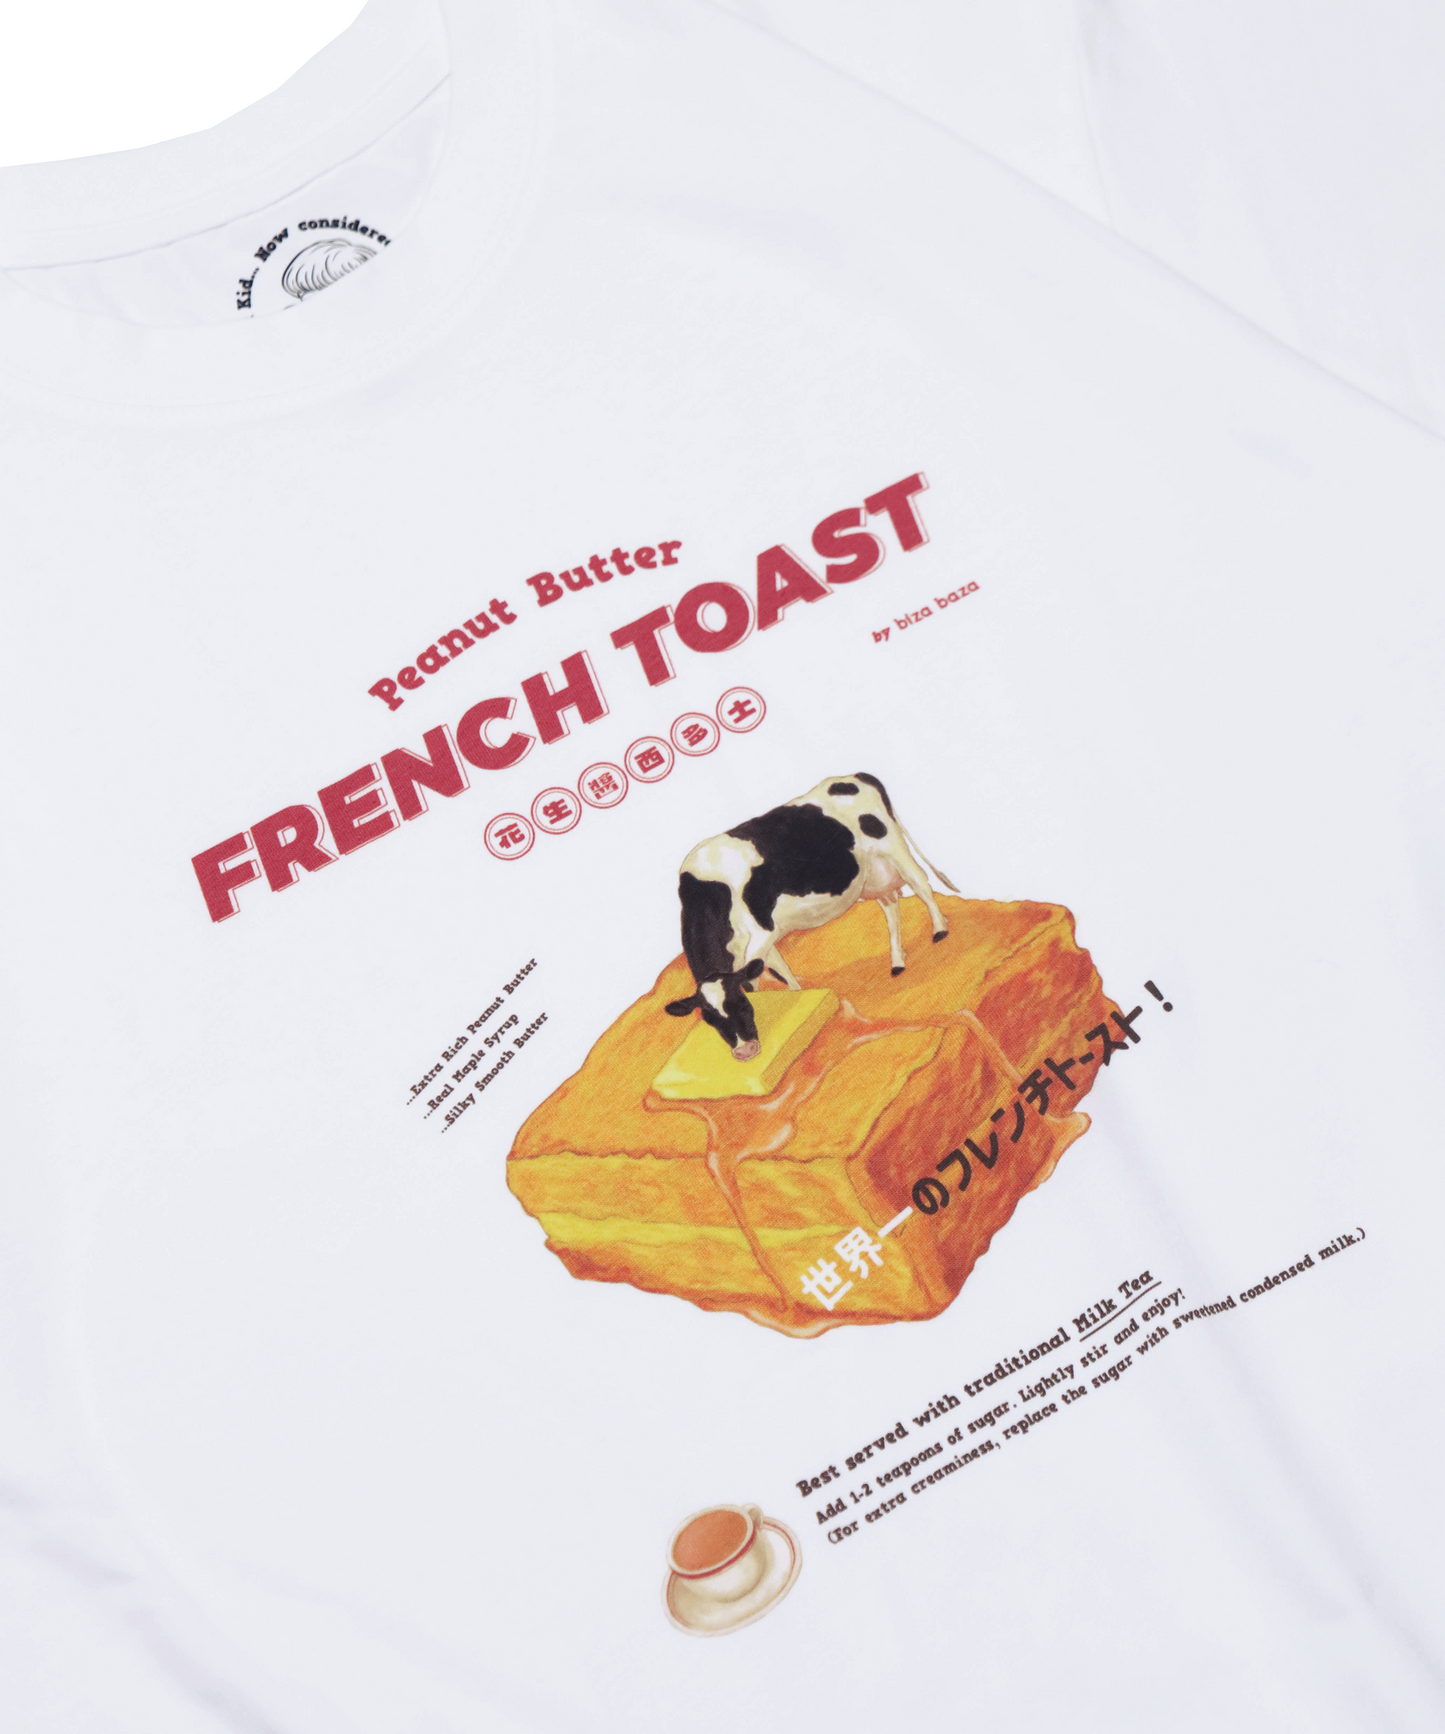 French Toast with Peanut Butter Retro T-shirt Series